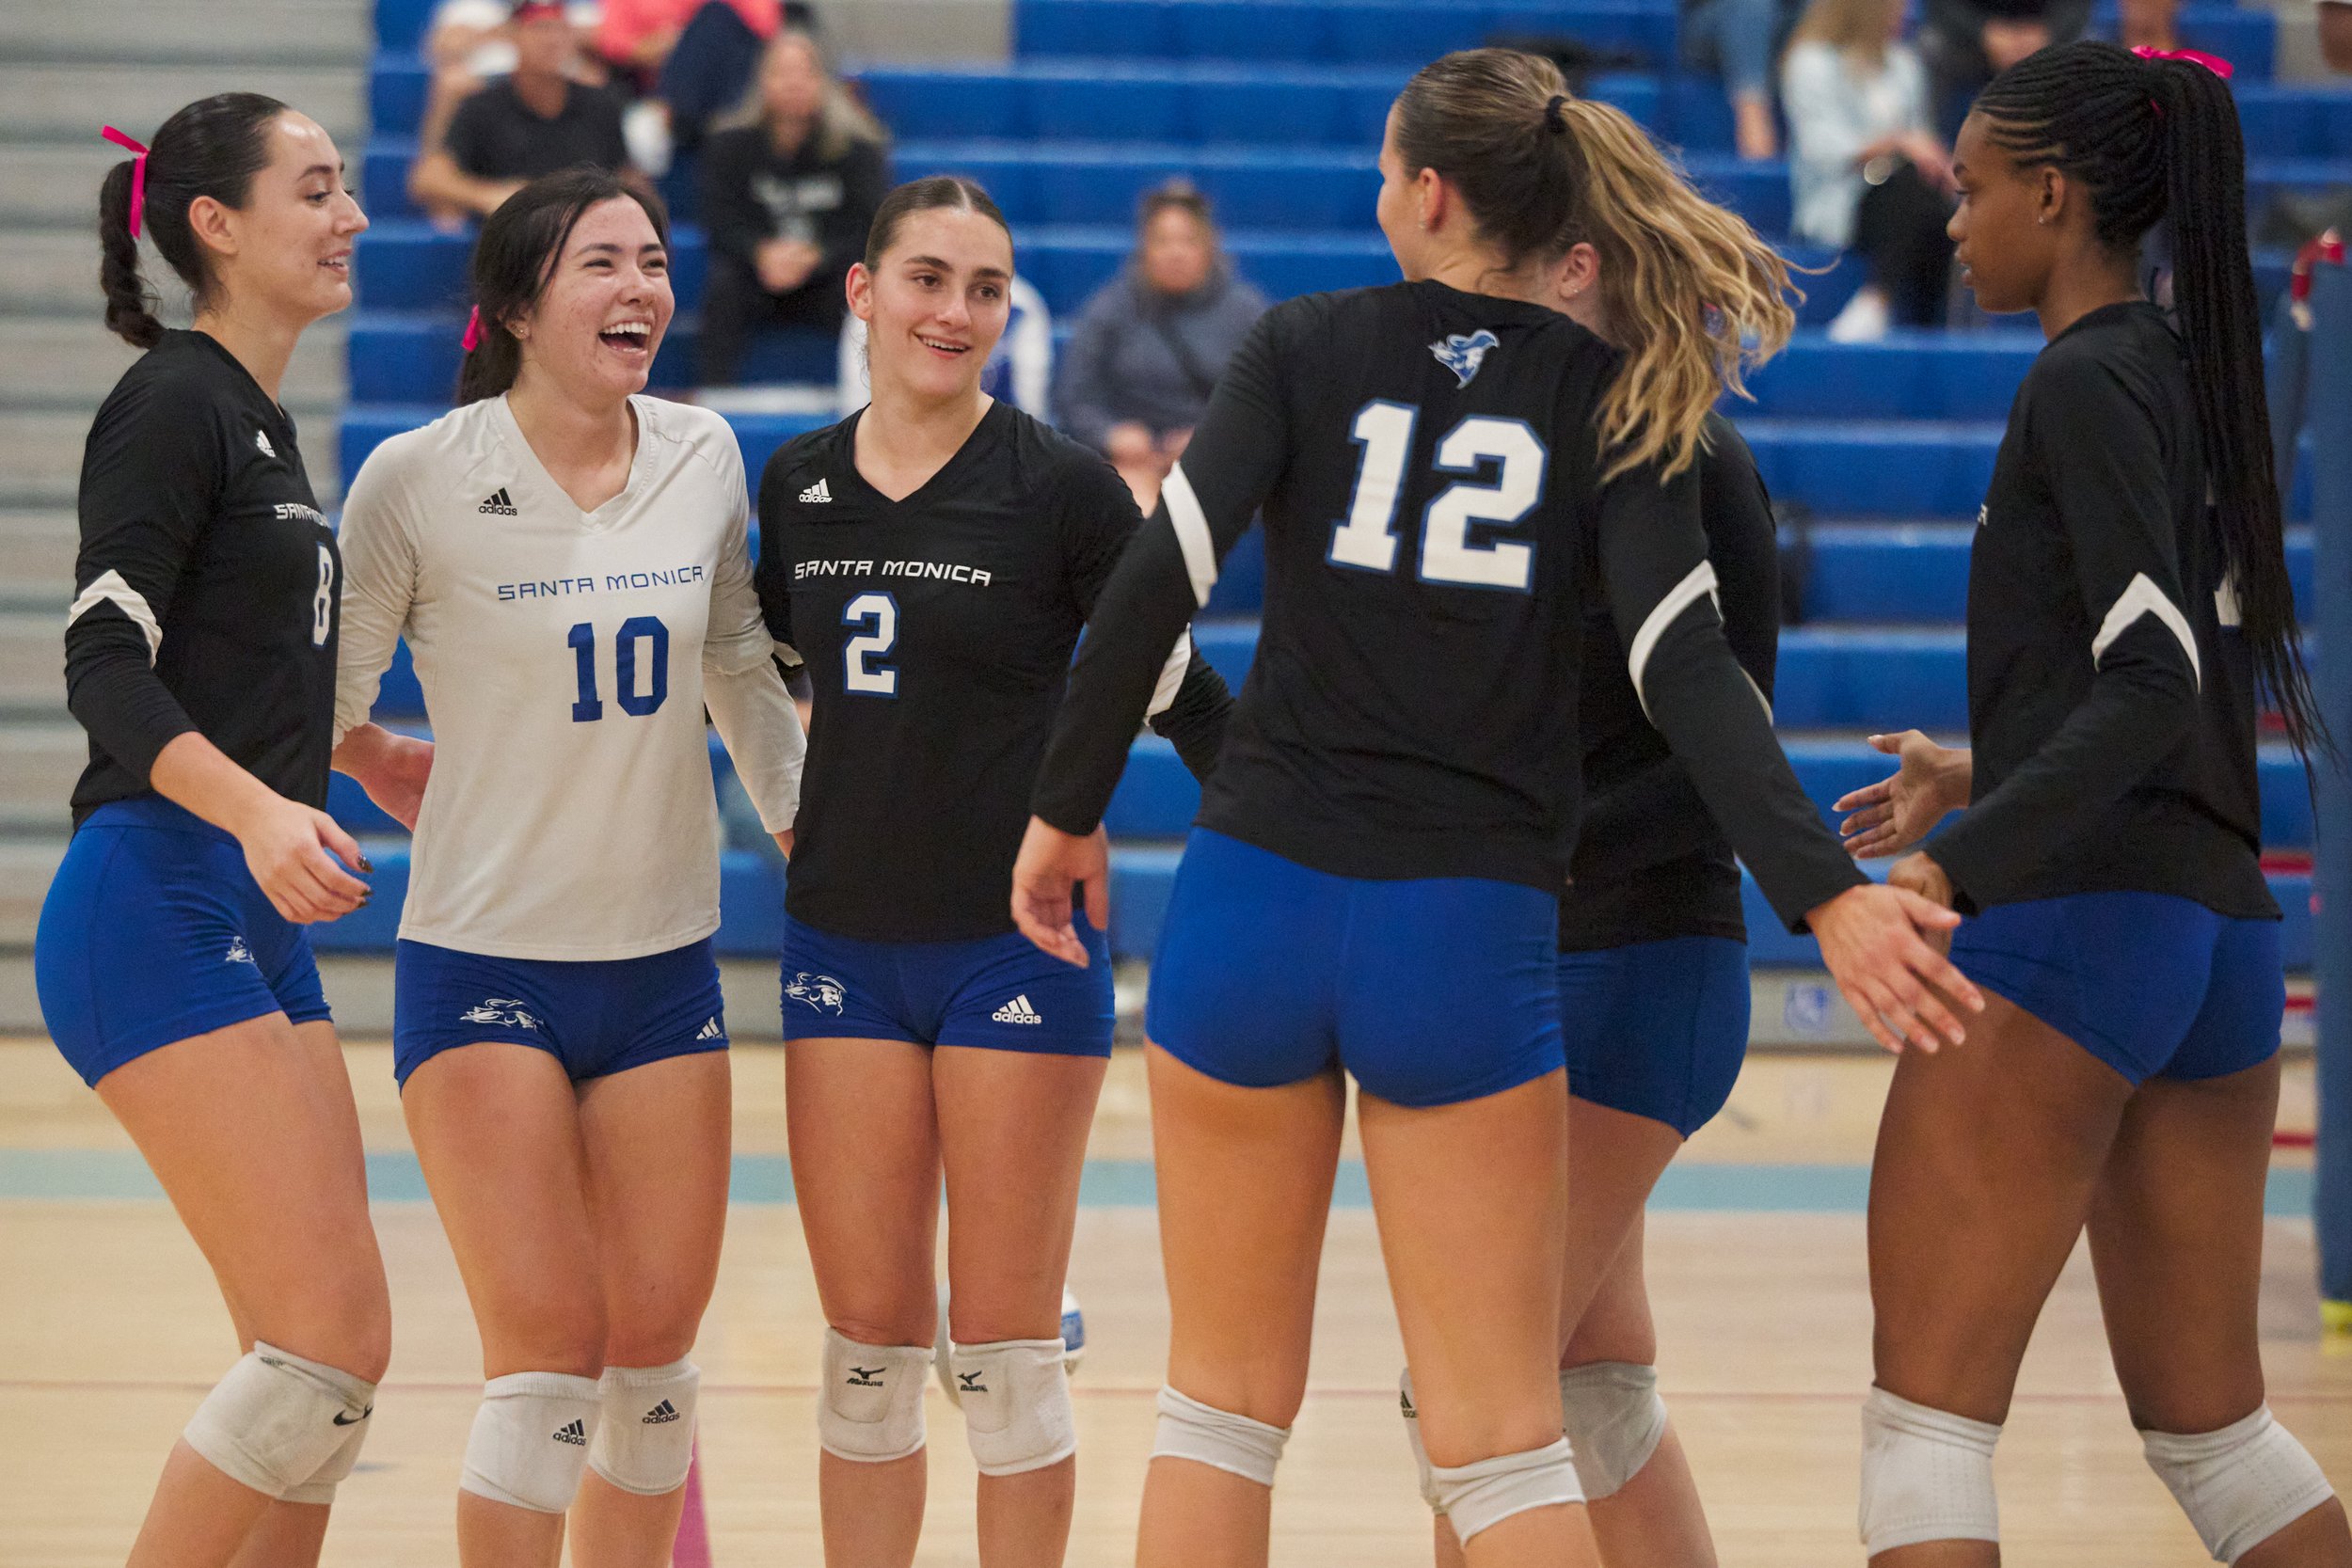  Santa Monica College Corsairs' Natalie Fernandez, Sophia Odle, Prior Borick, Mia Paulson, and Zarha Stanton during the women's volleyball match against the College of the Canyons Cougars on Friday, Oct. 27, 2023, at Corsair Gym in Santa Monica, Cali